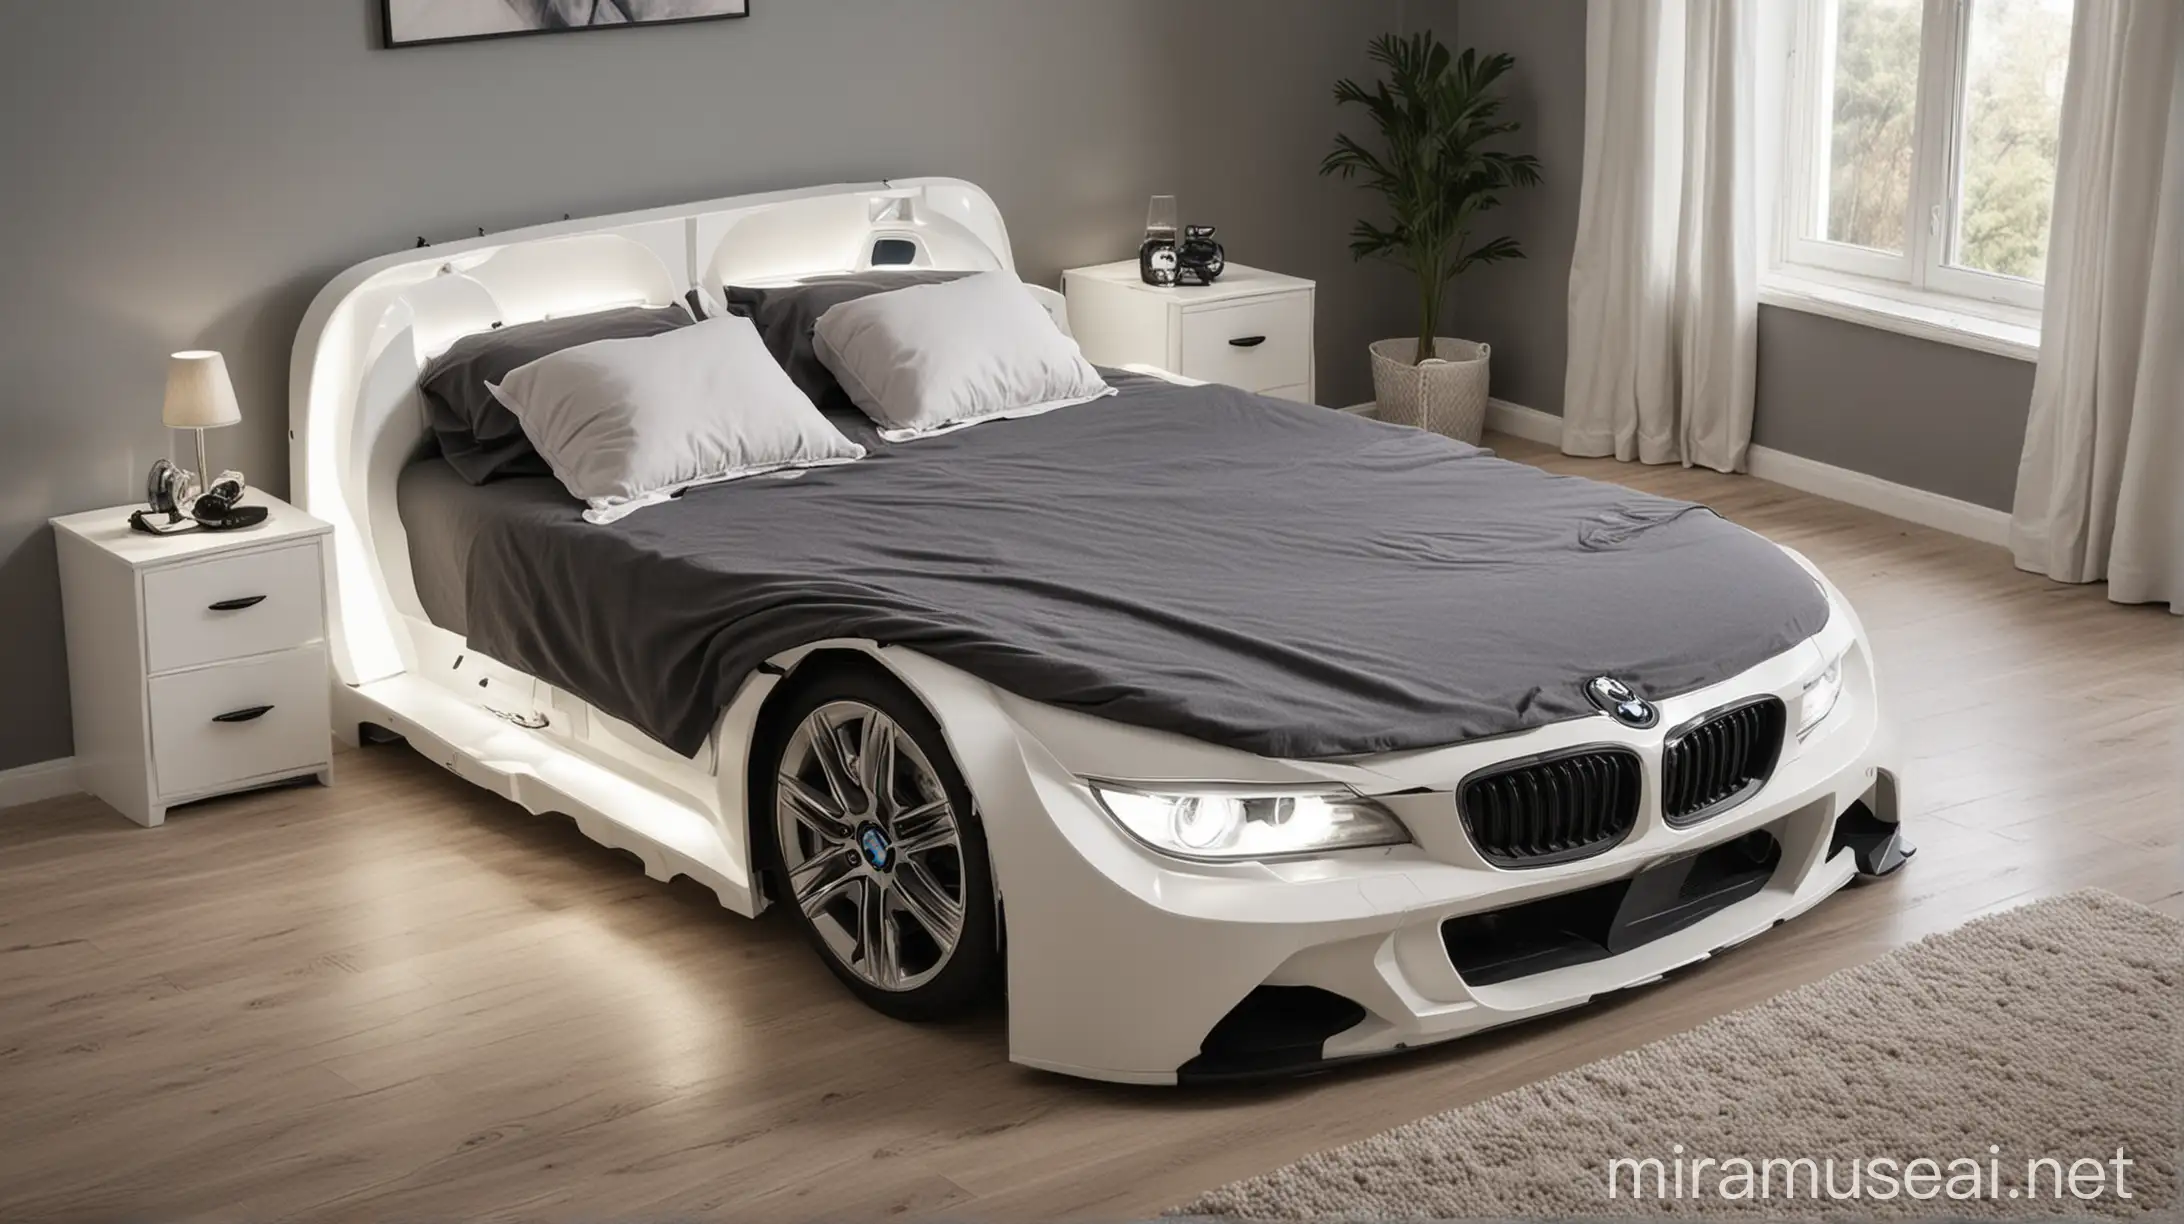 Double bed in the shape of a bmw car